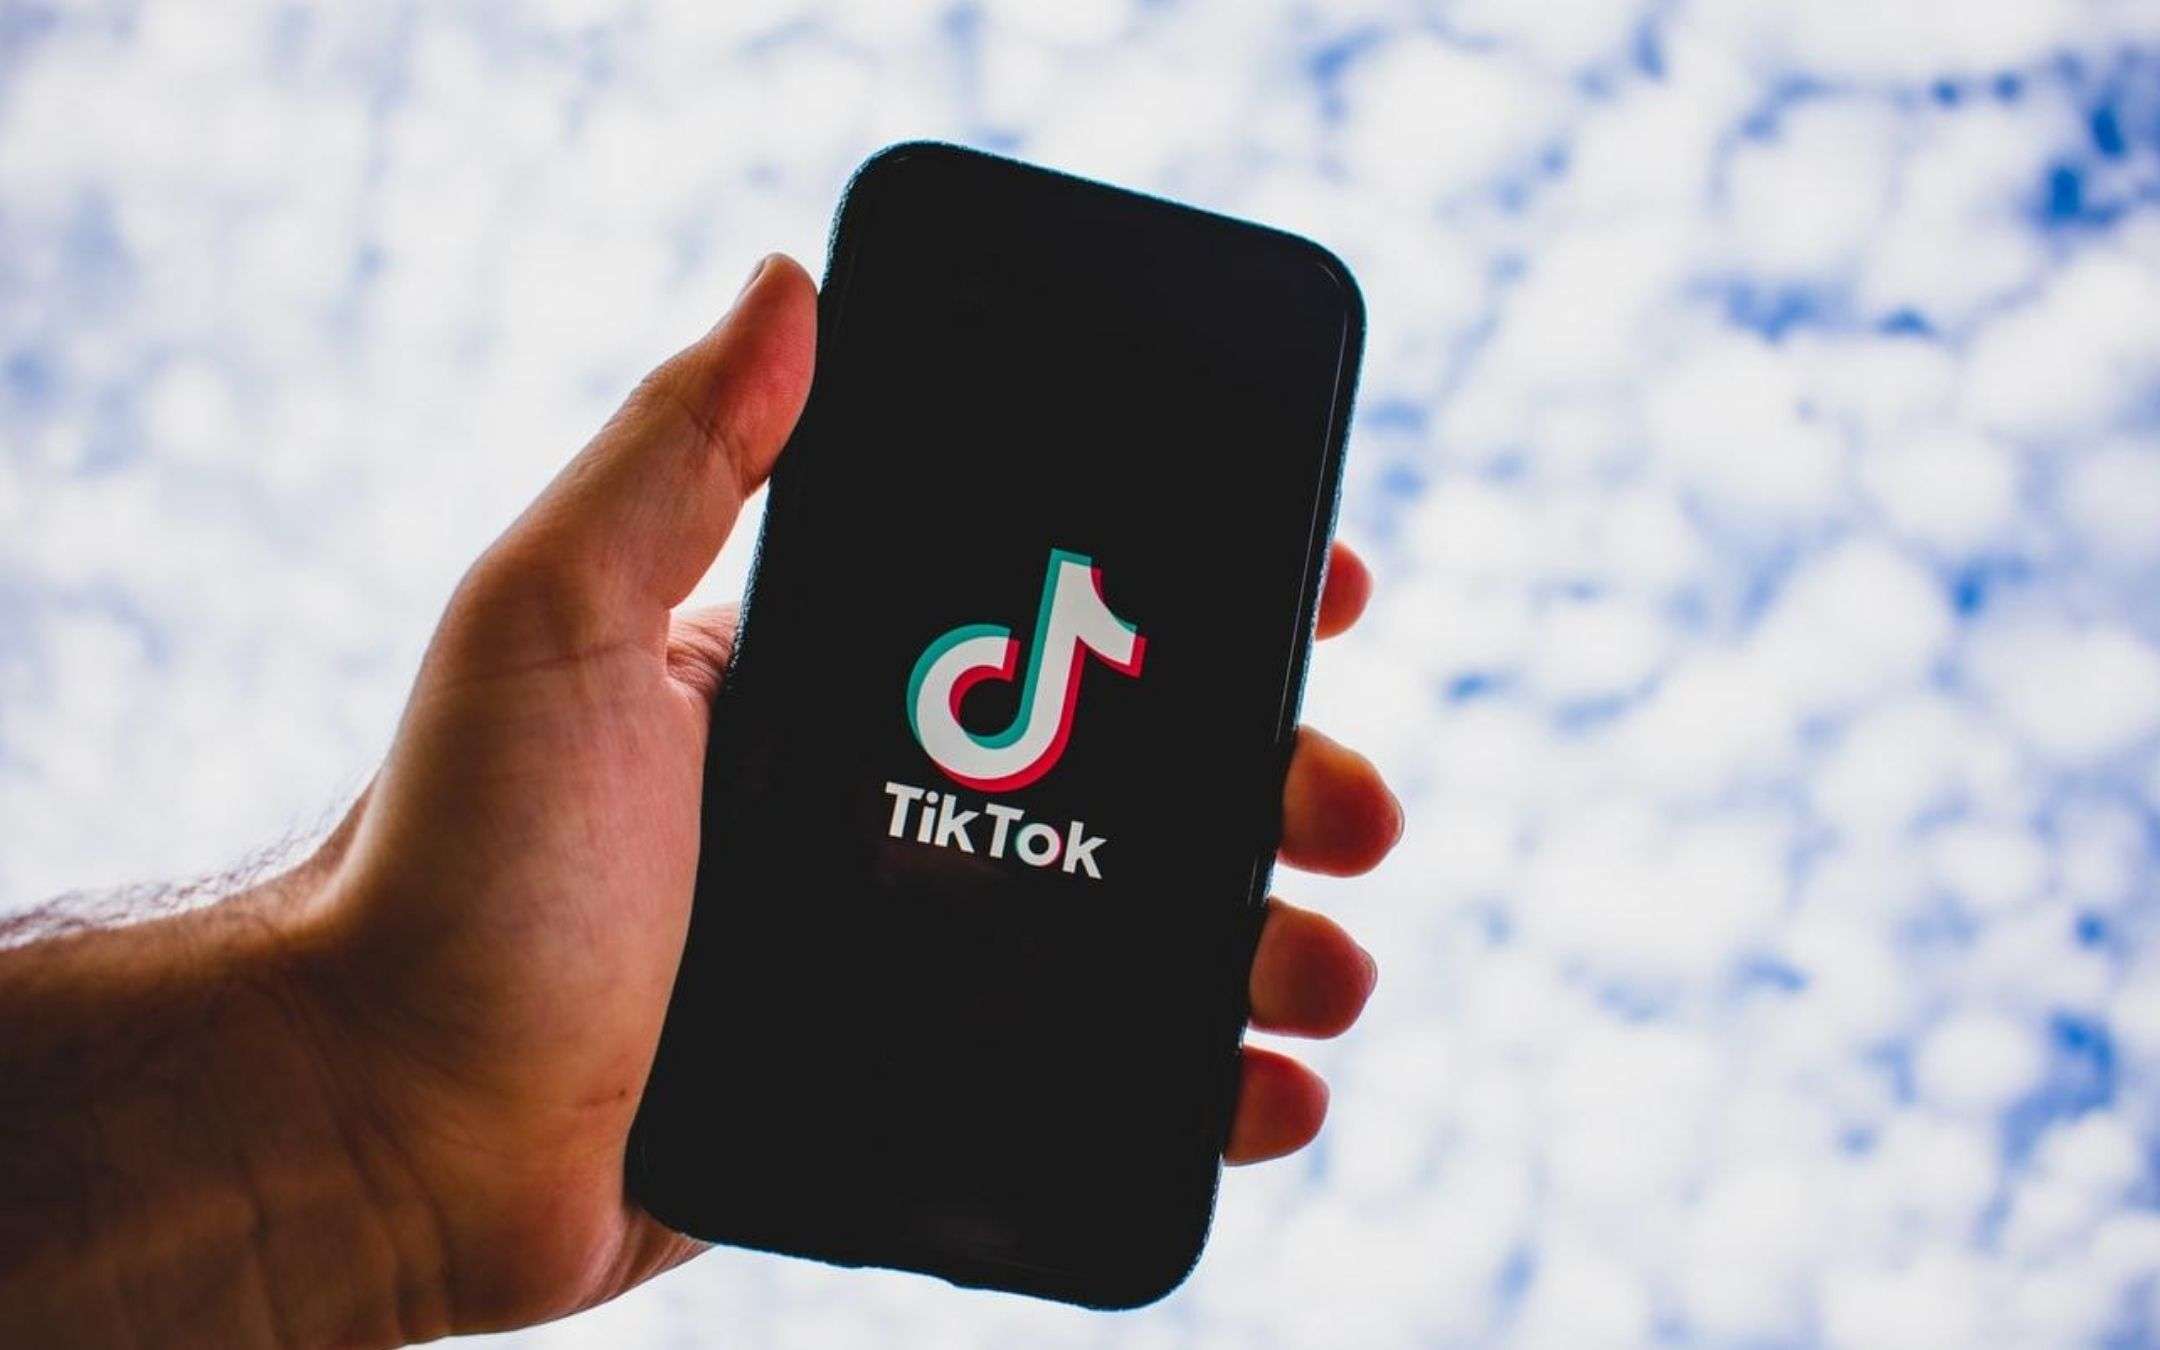 TikTok: what if Oracle acquired it?